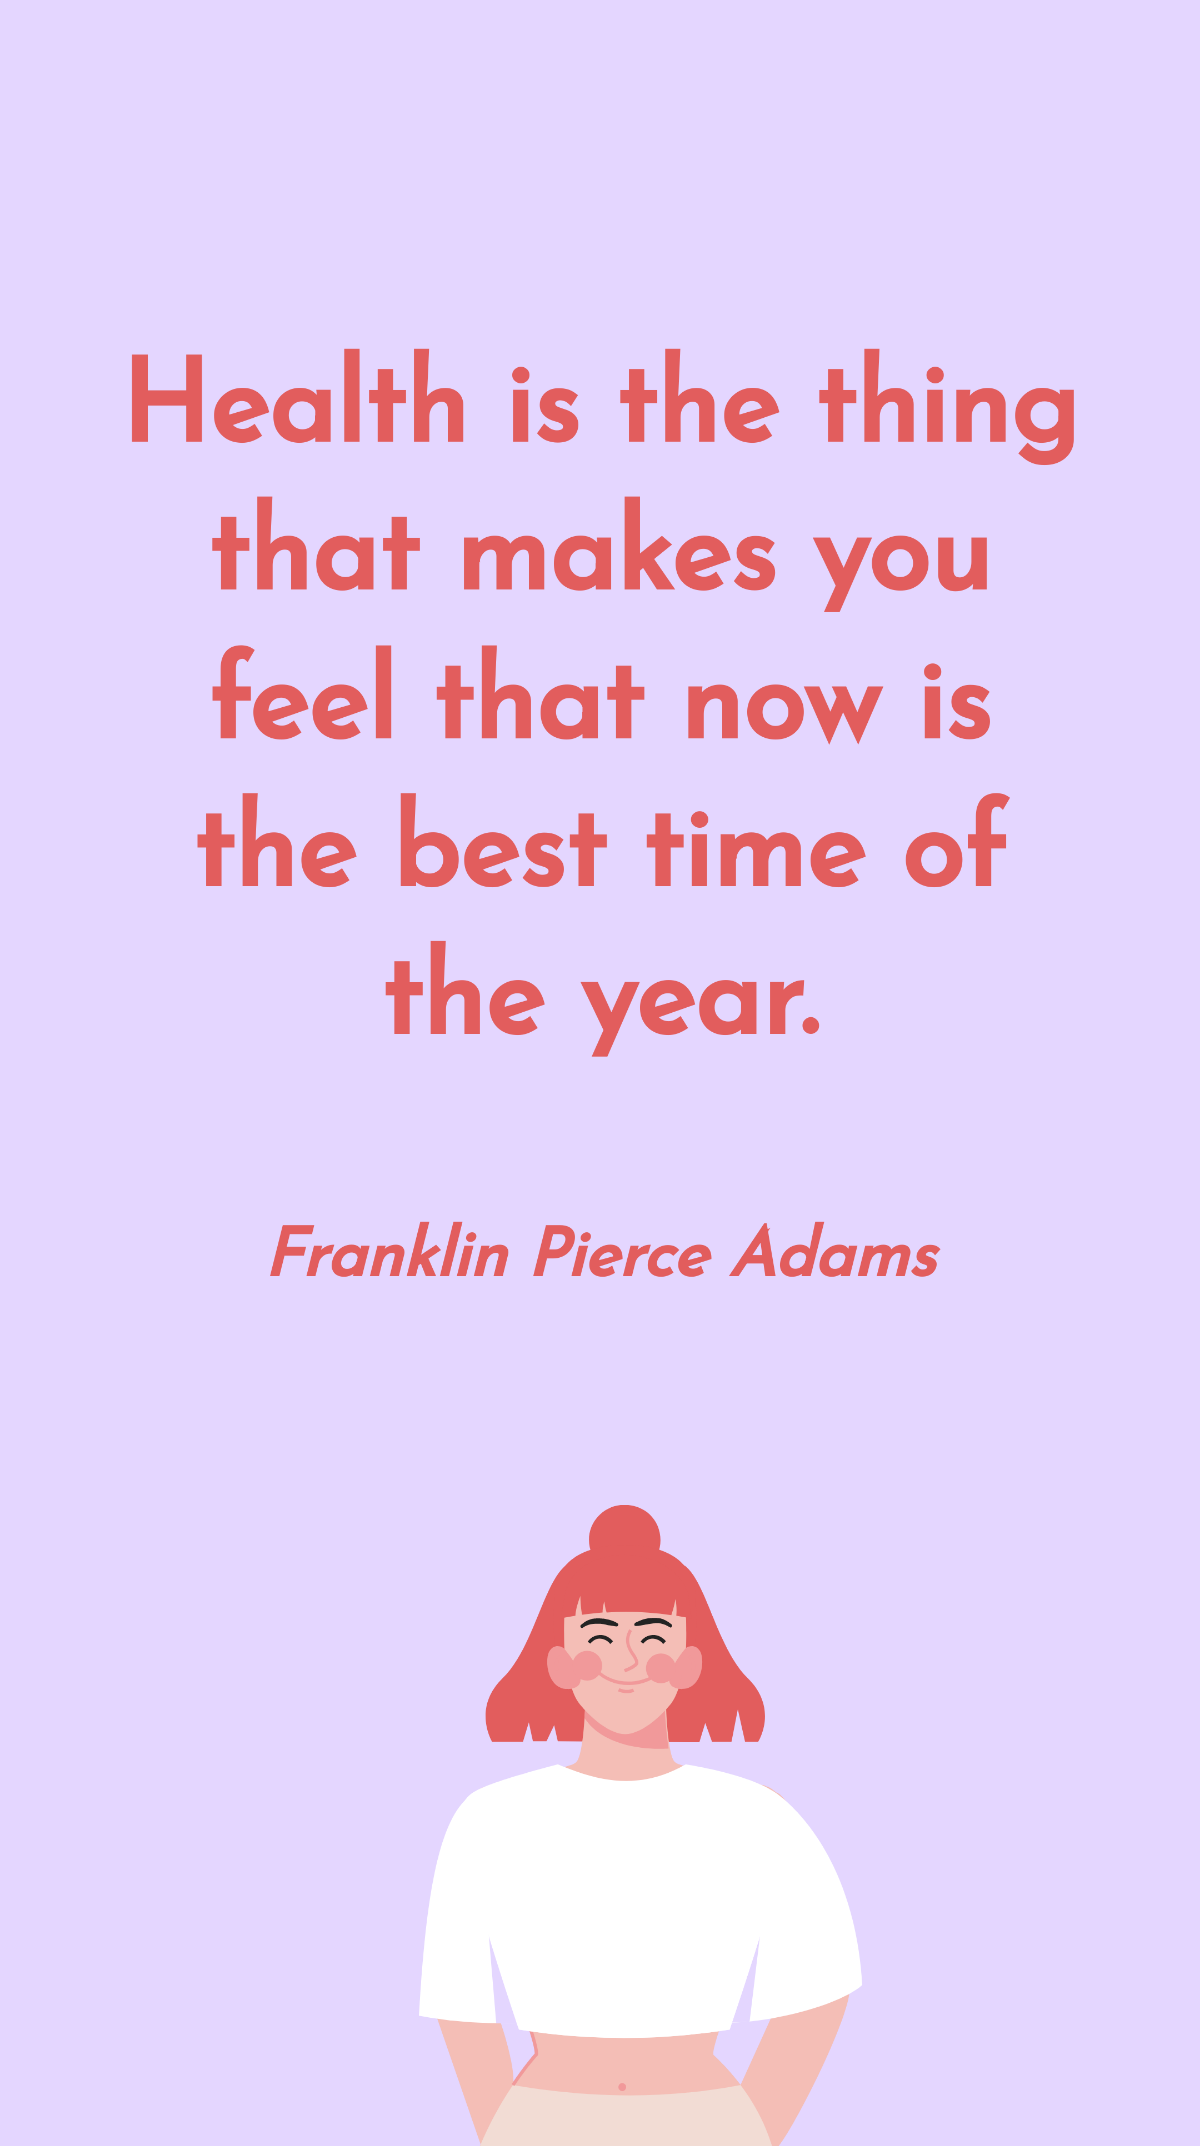 Franklin Pierce Adams - Health is the thing that makes you feel that now is the best time of the year.